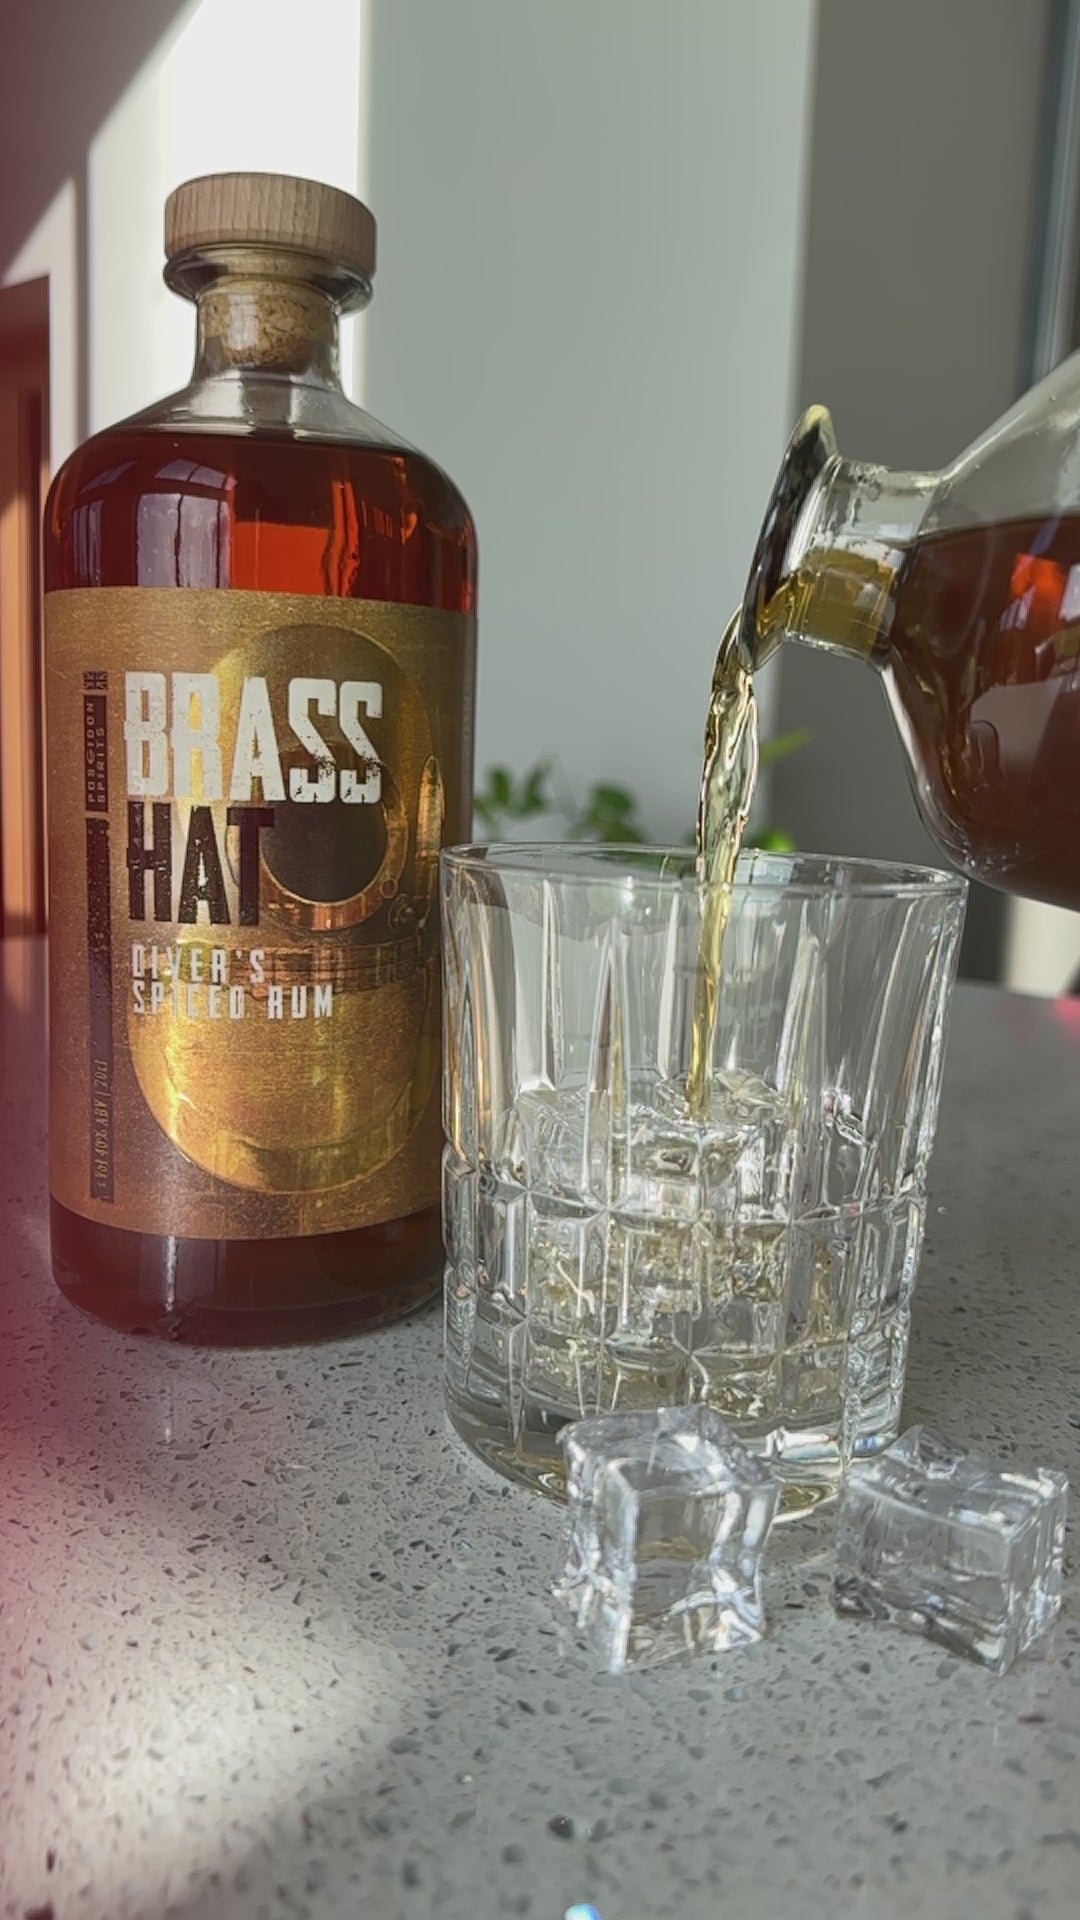 slow motion video of a bottle of Brass Hat Diver's Spiced Rum being poured into a crystal glass with ice cubes